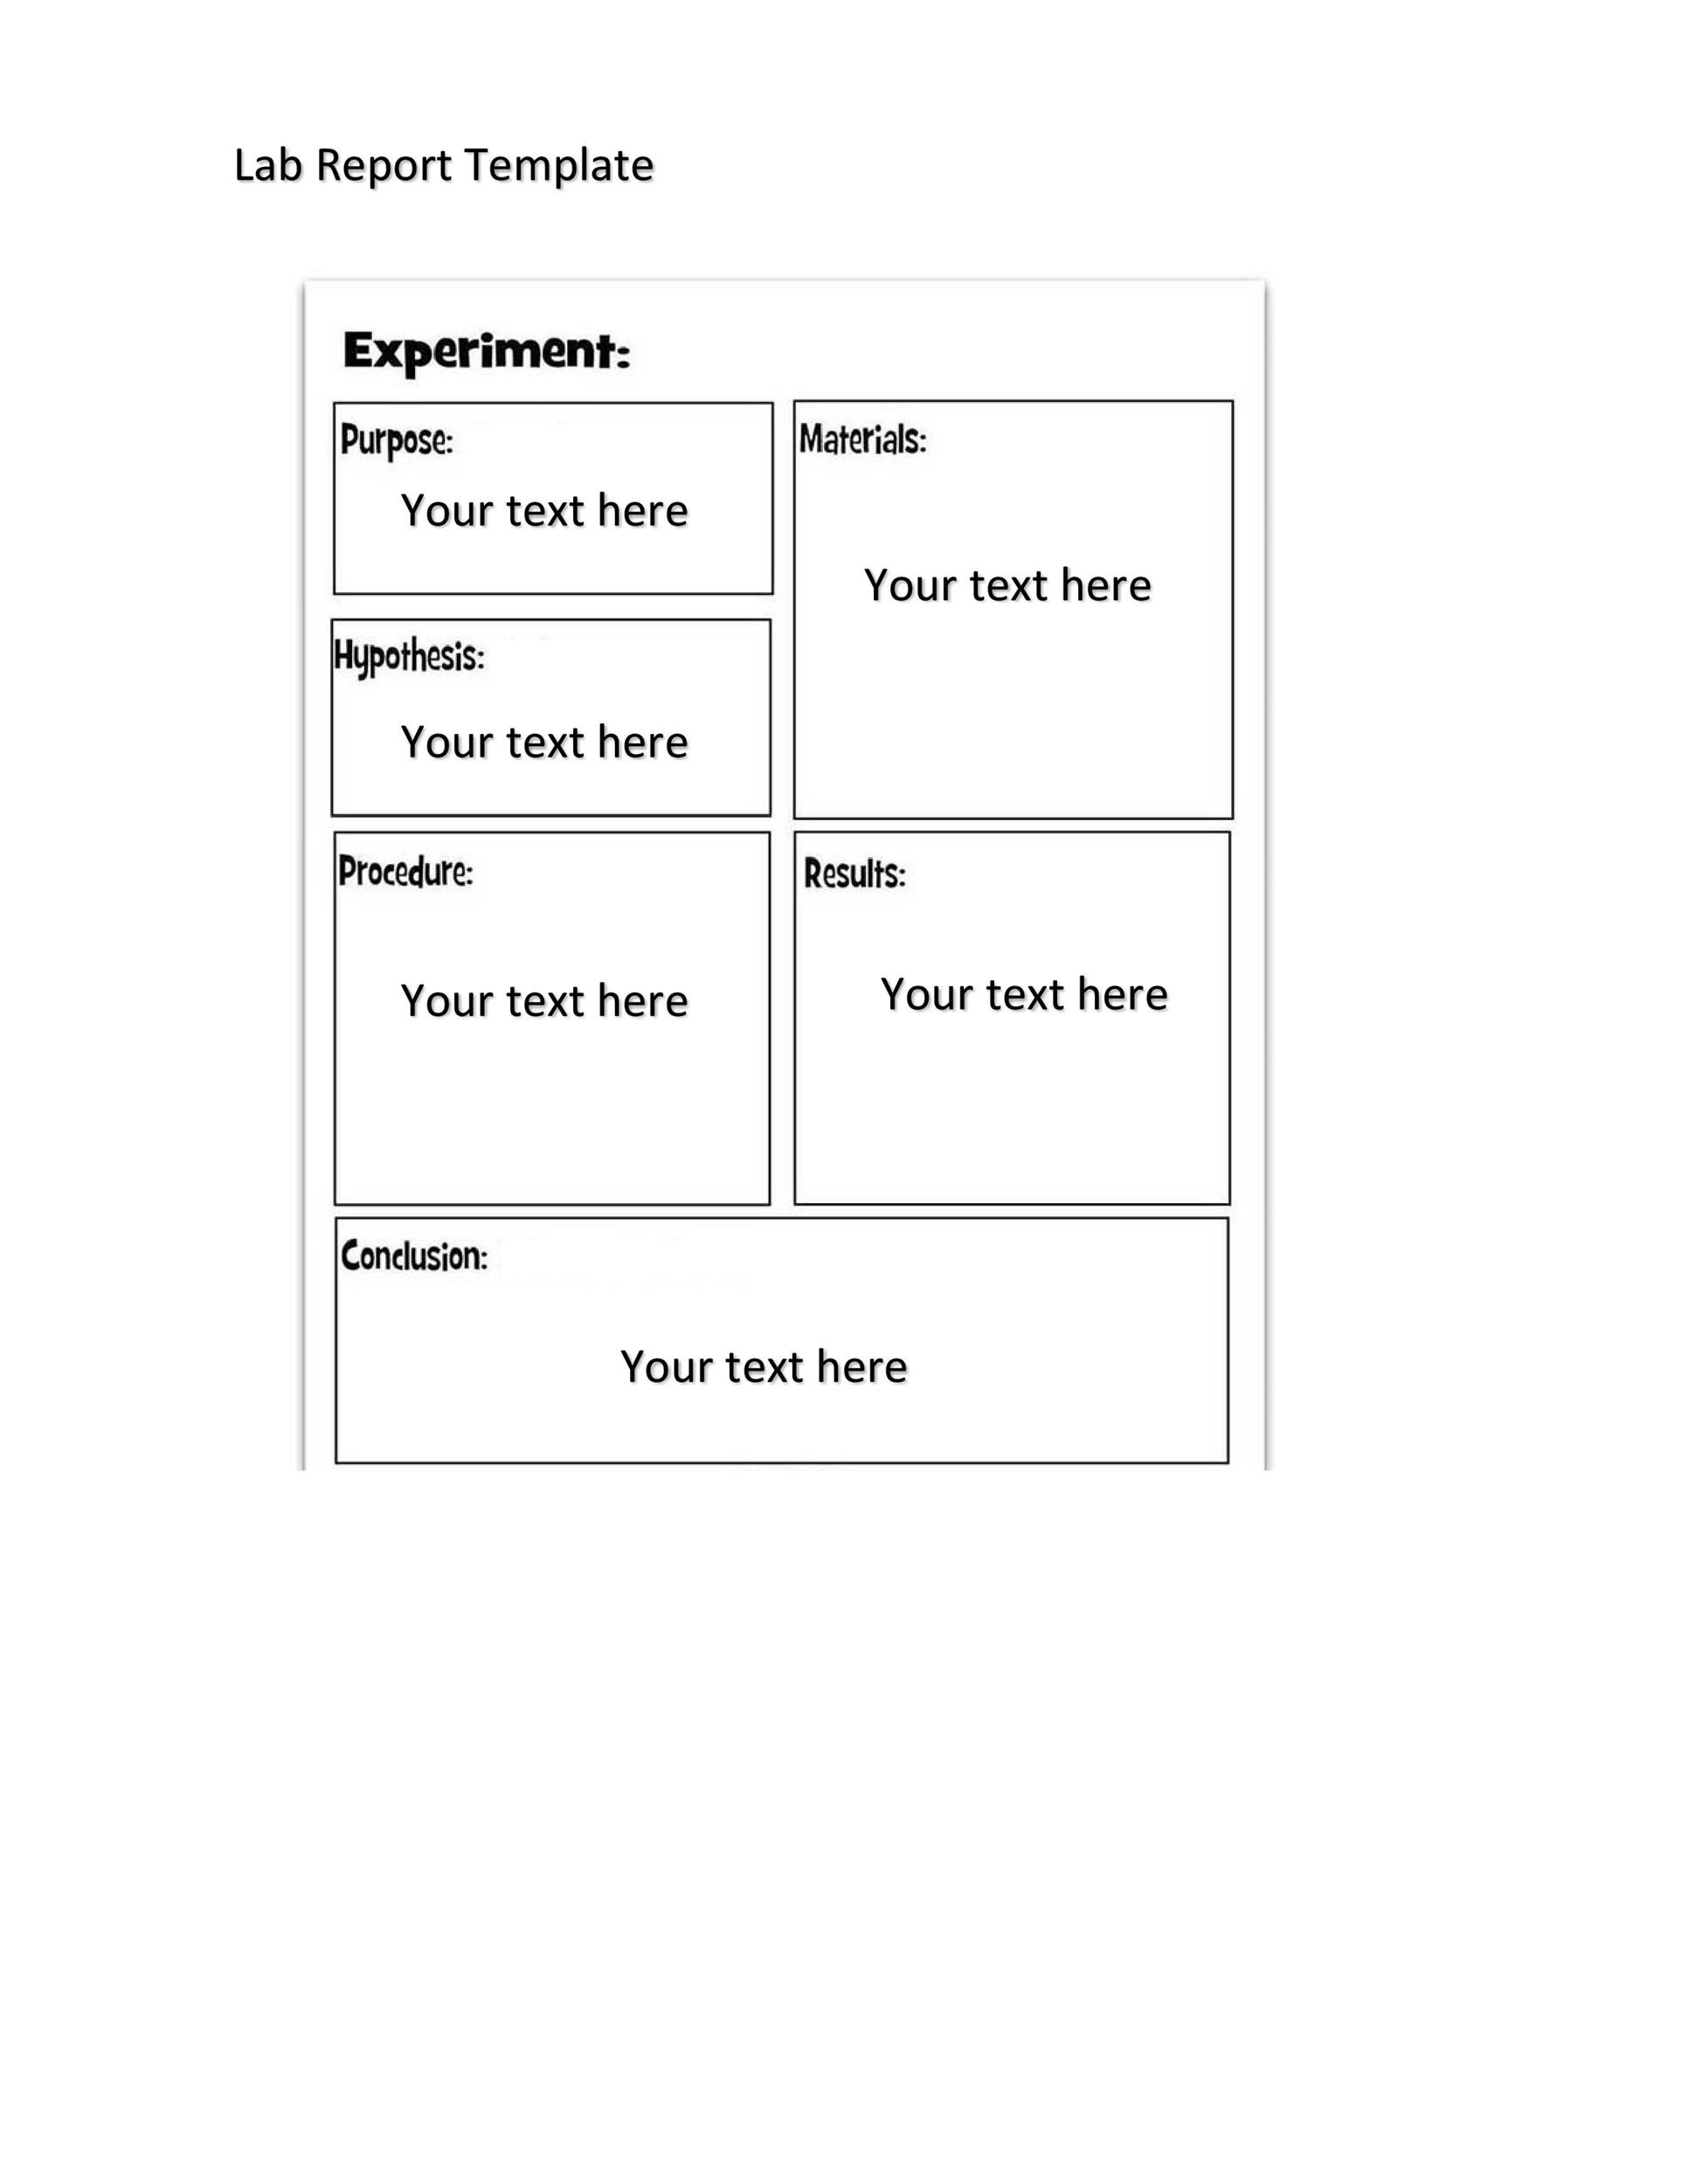 Free lab report template 35